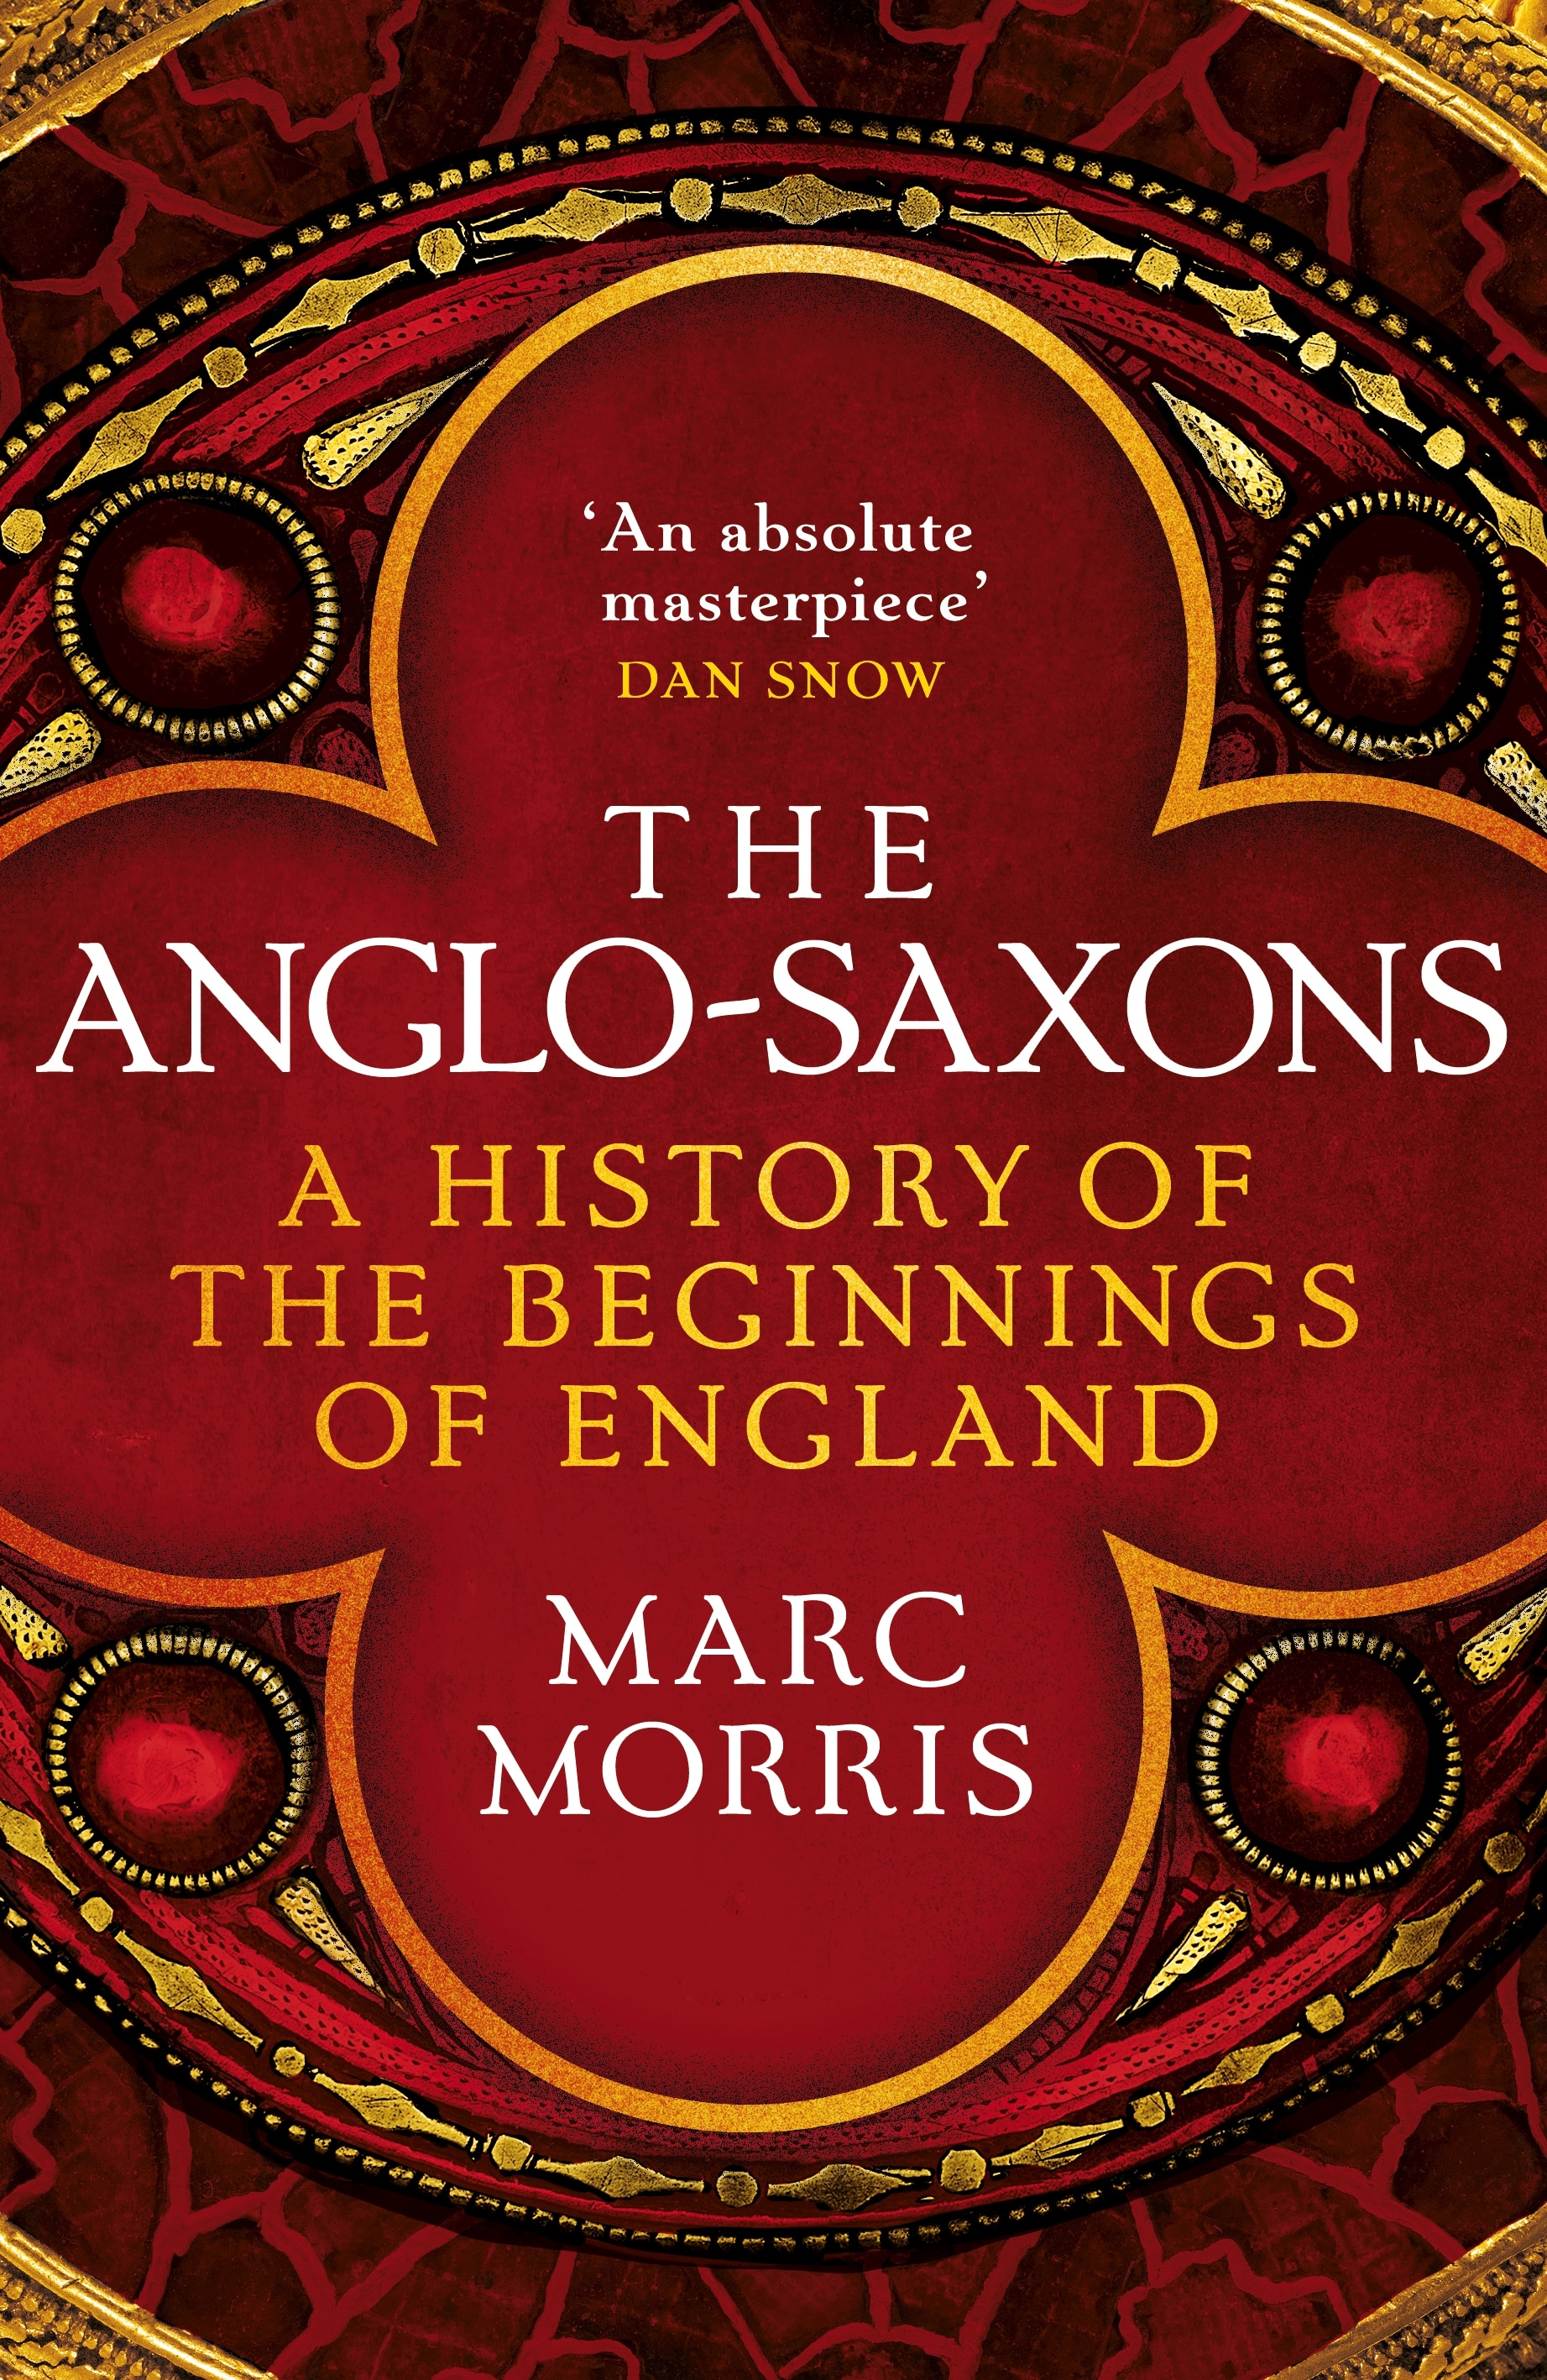 Book “The Anglo-Saxons” by Marc Morris — May 20, 2021